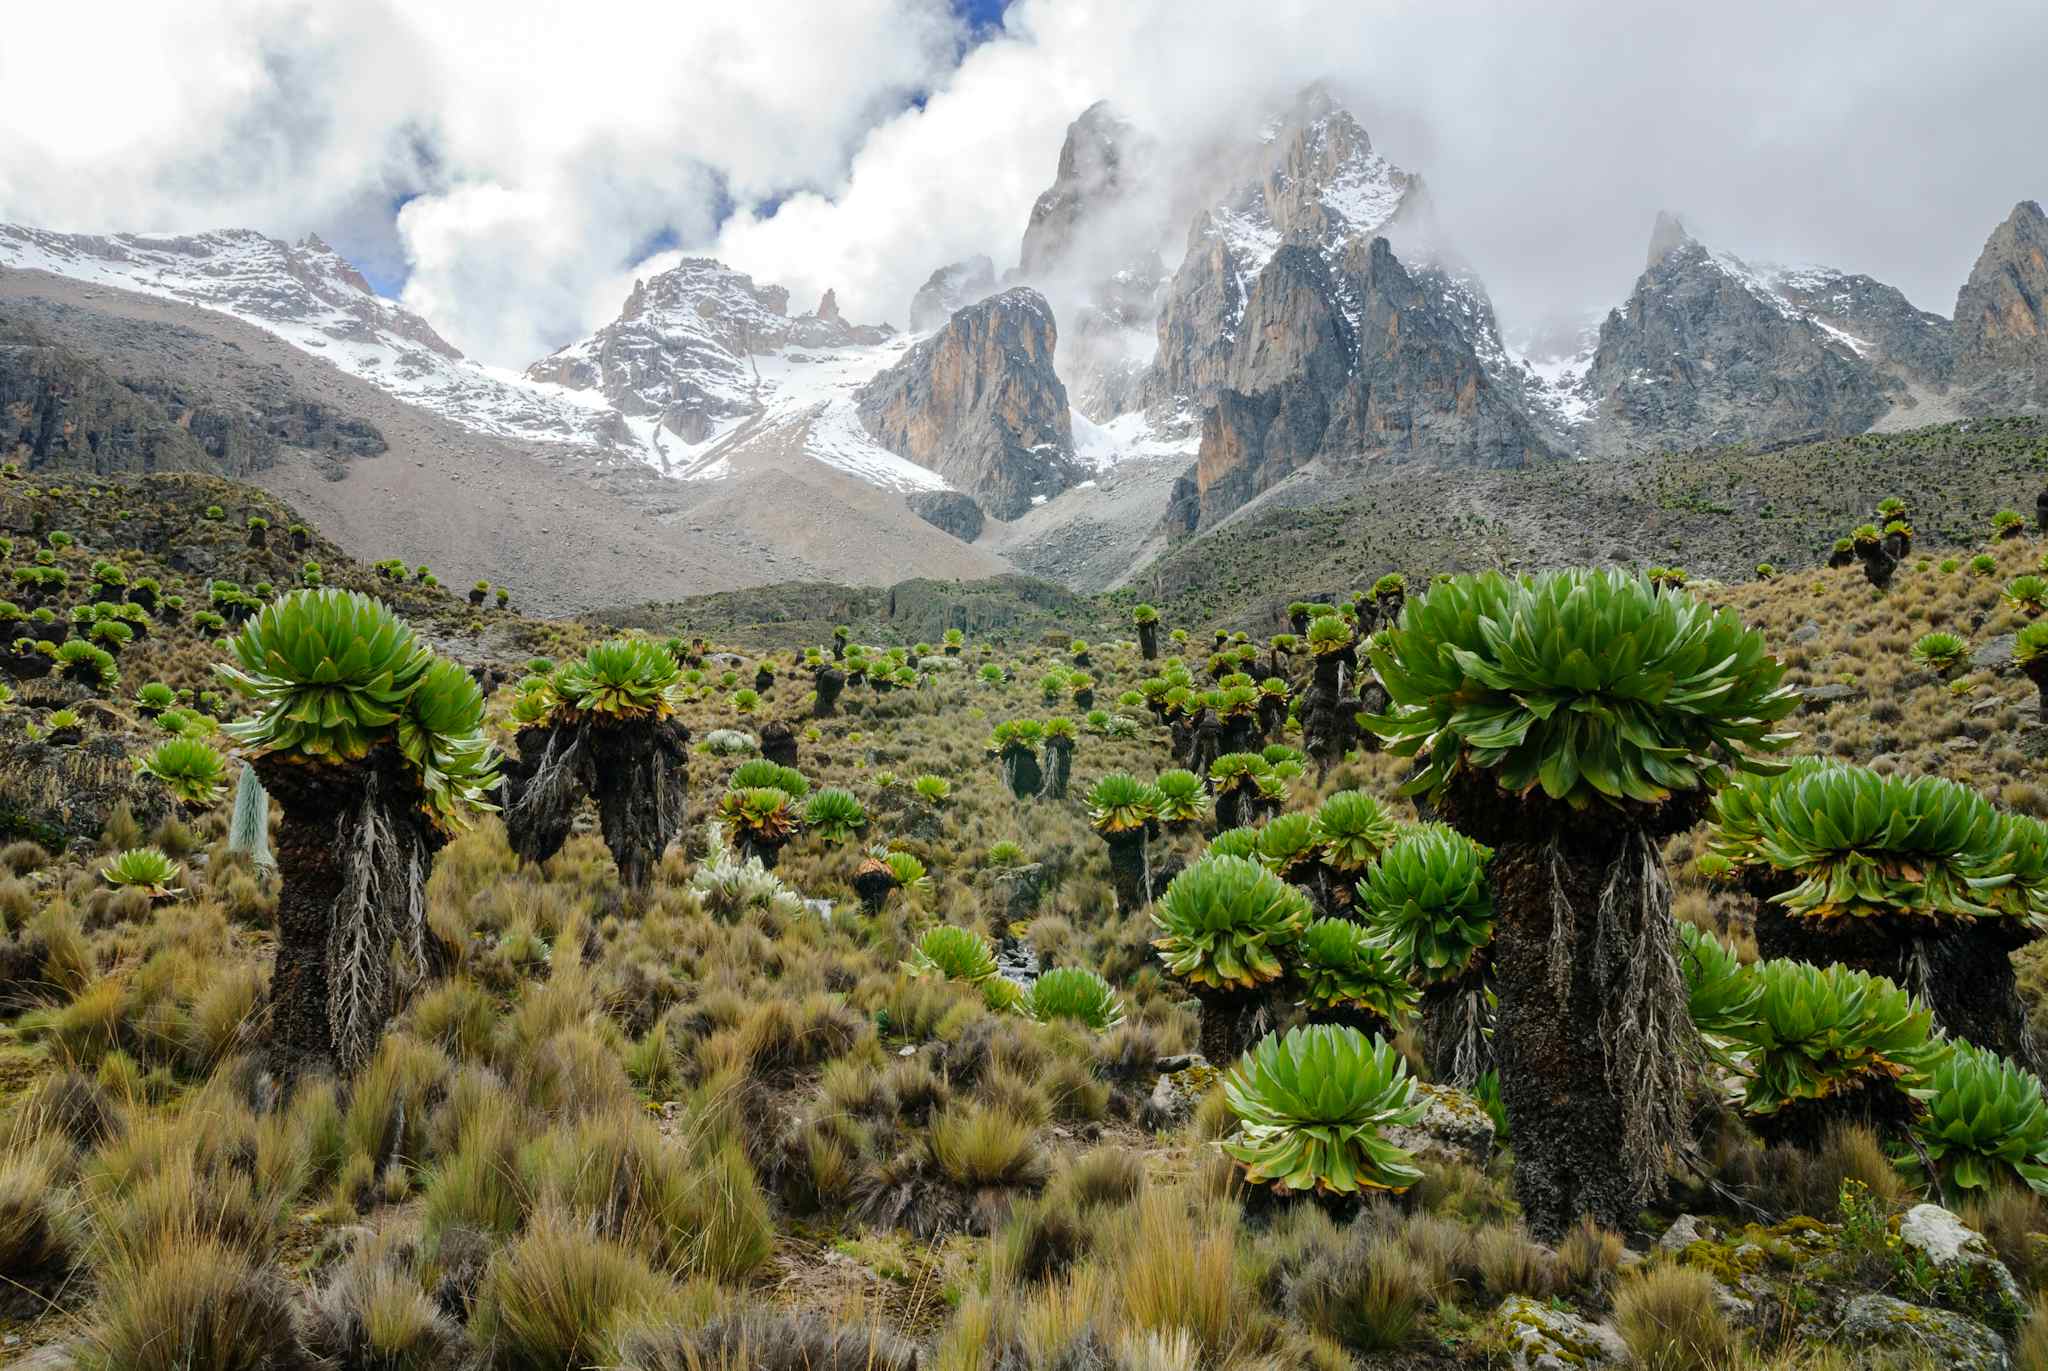 Giant Groundsels with Mount Kenya in the clouds
